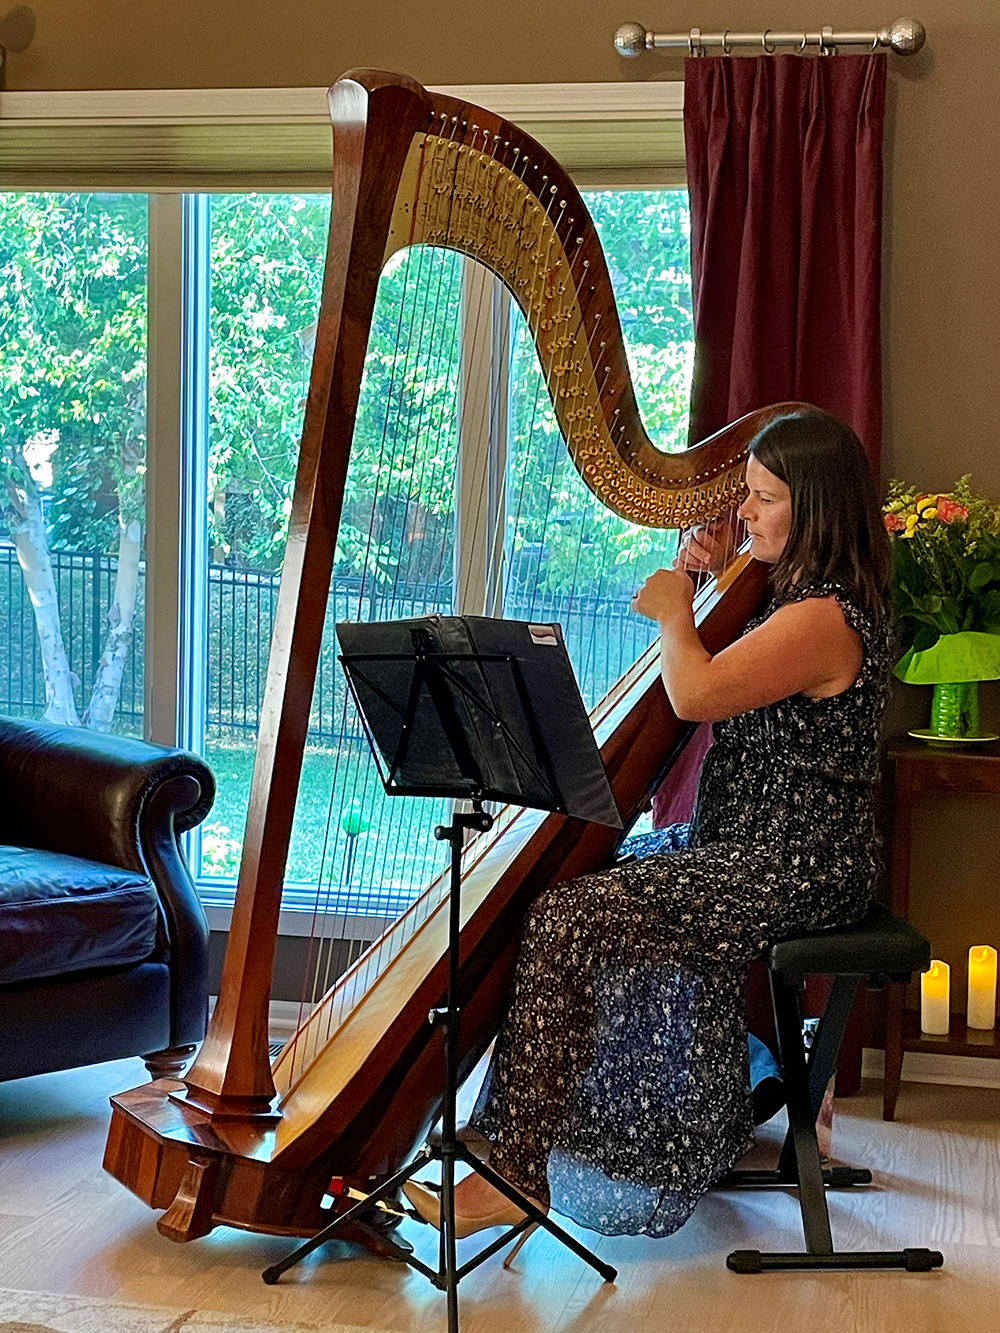 Maybe the next time I hear the word “hospice,” I’ll think about harps and beautiful music.